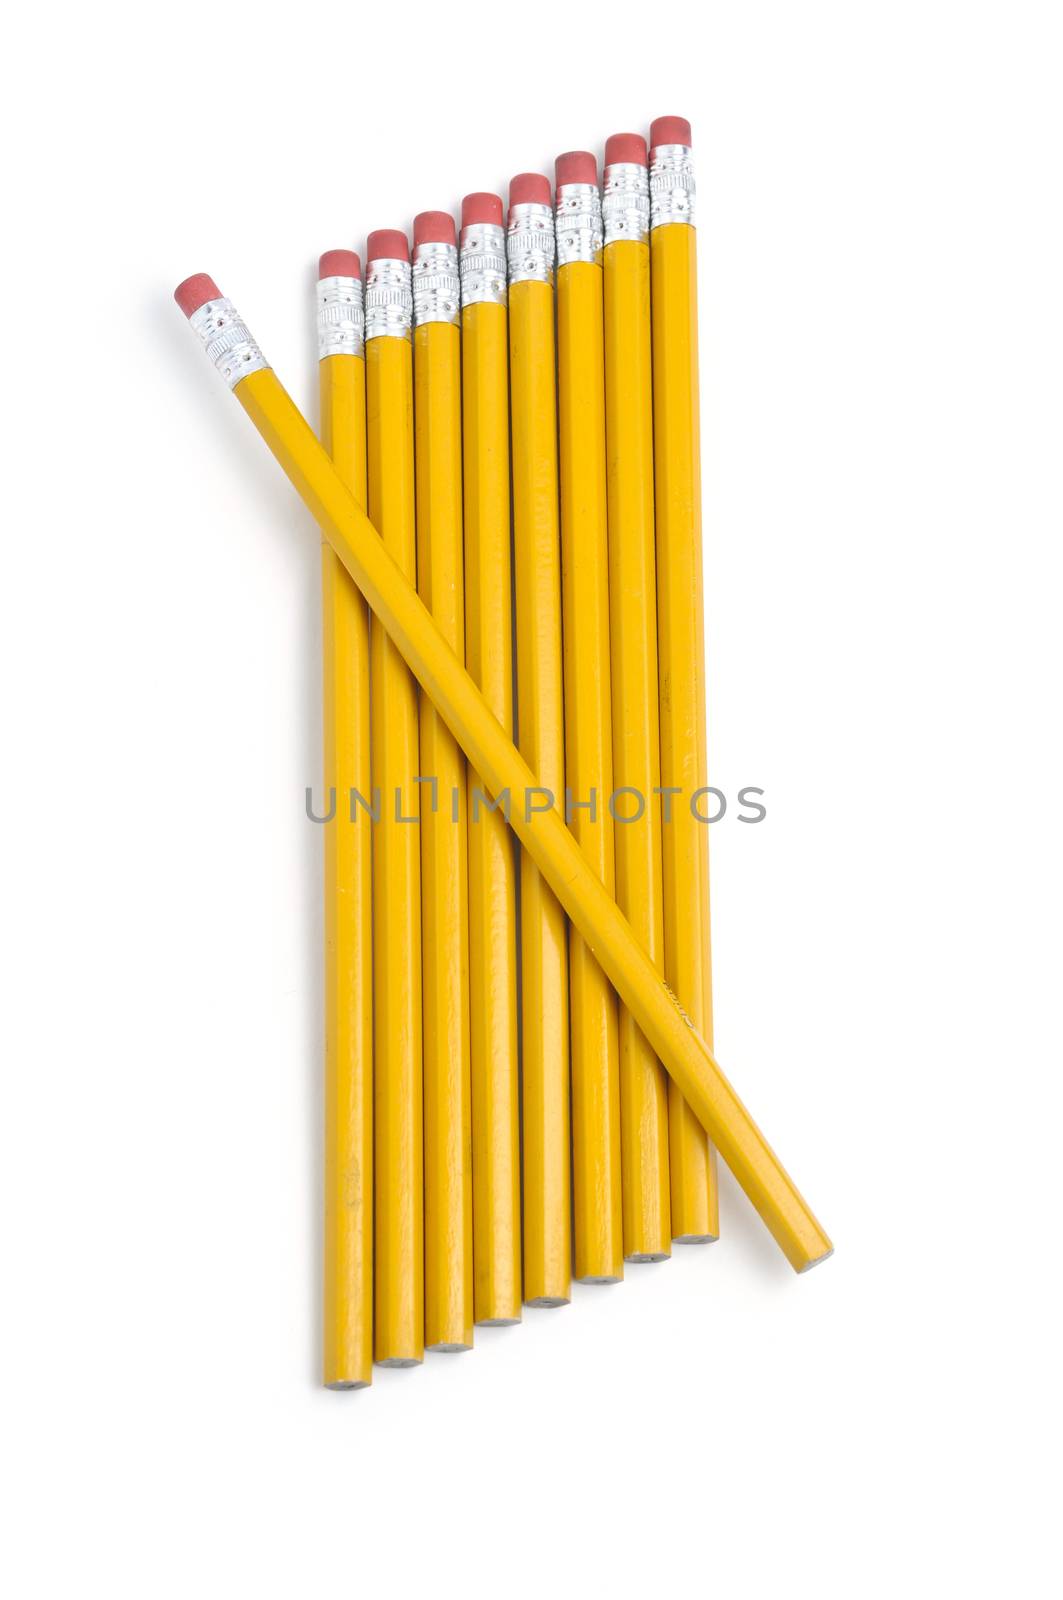 Slanted Row Of Pencils With One Diagonal by rcarner